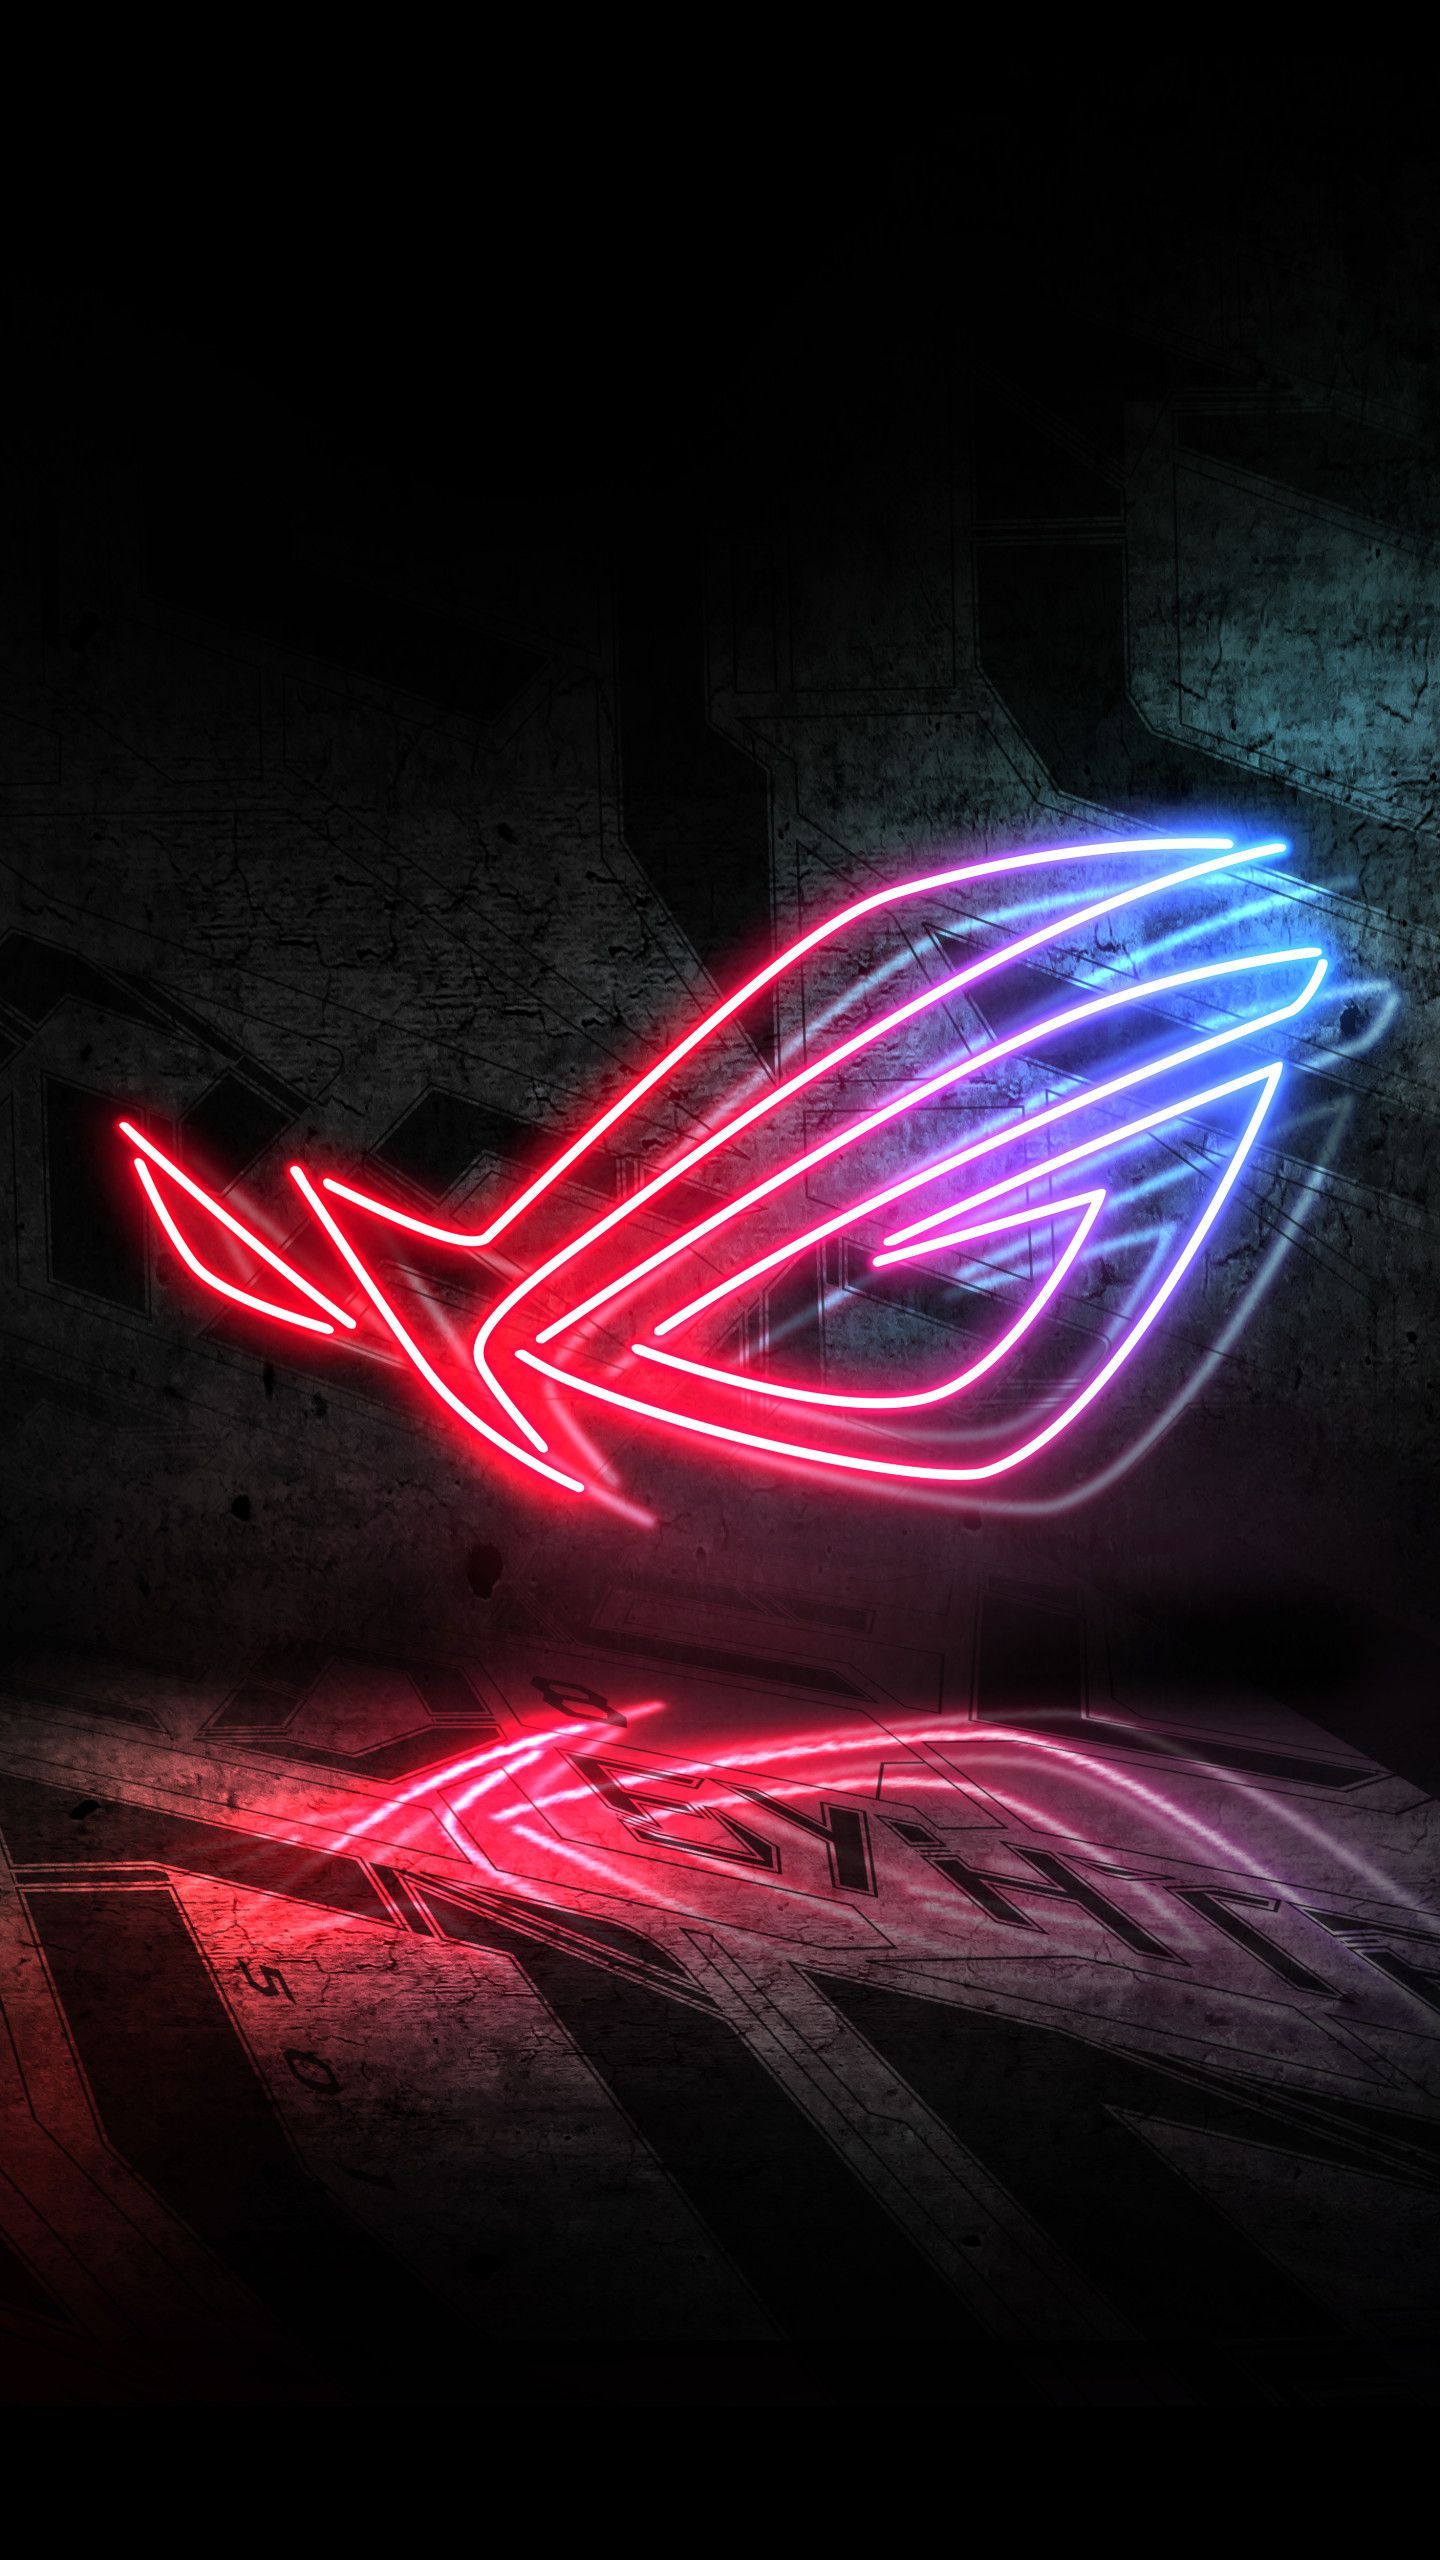 Rog Neon Logo 5k In 1440x2560 Resolution. Android wallpaper dark, Phone wallpaper design, Neon wallpaper